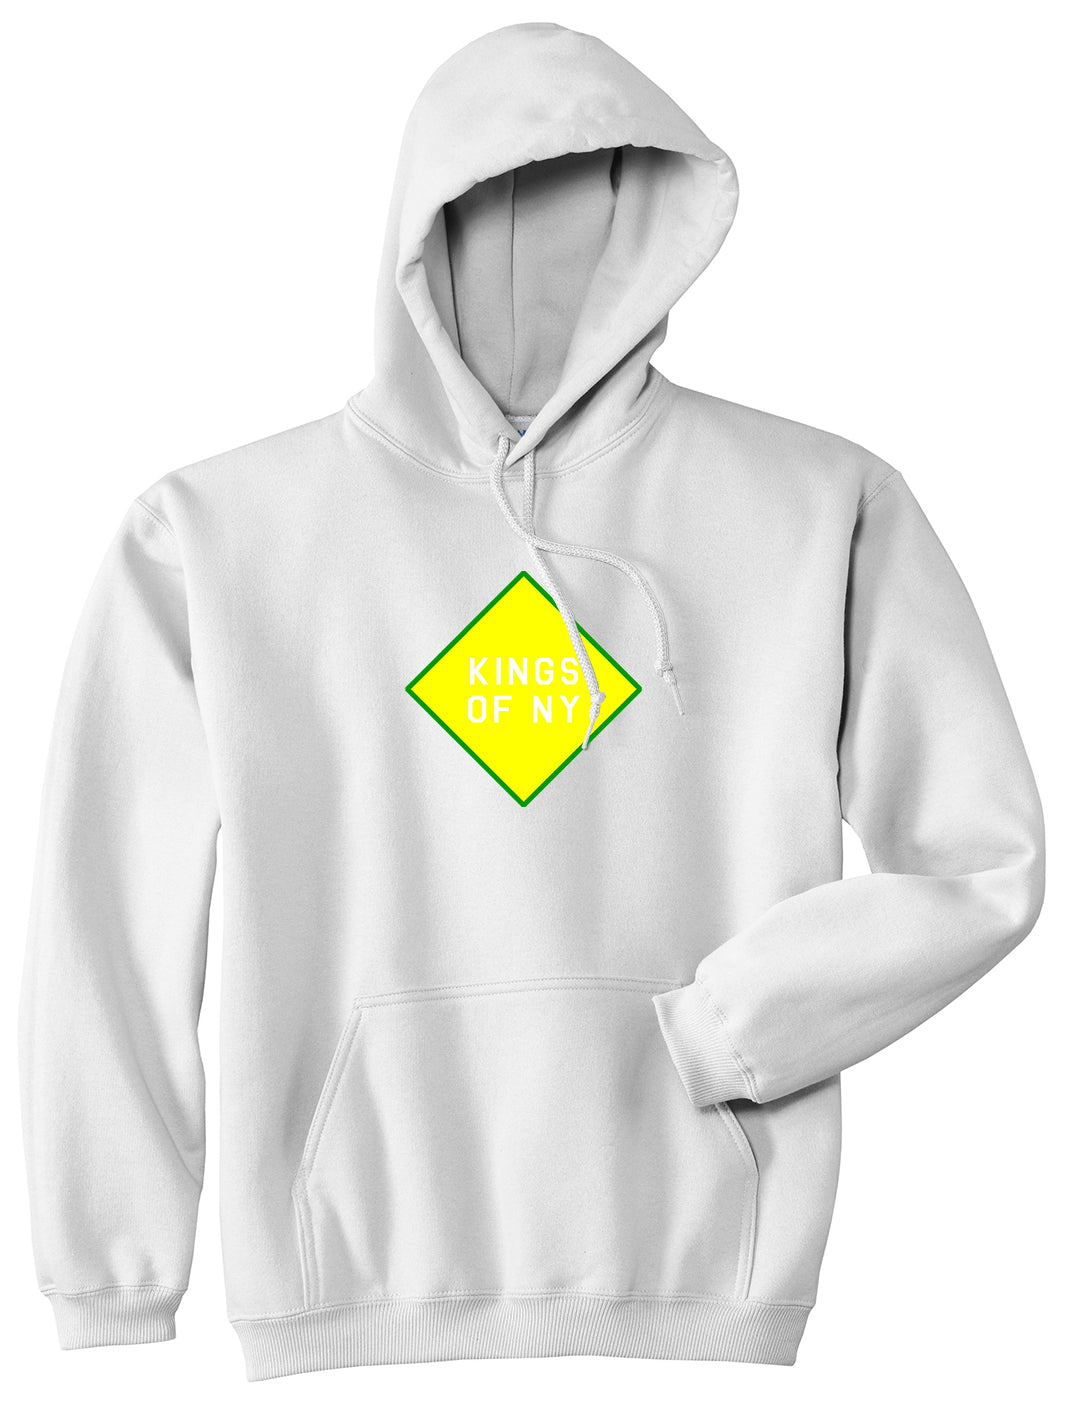 Diamond Logo Mens Pullover Hoodie White by Kings Of NY